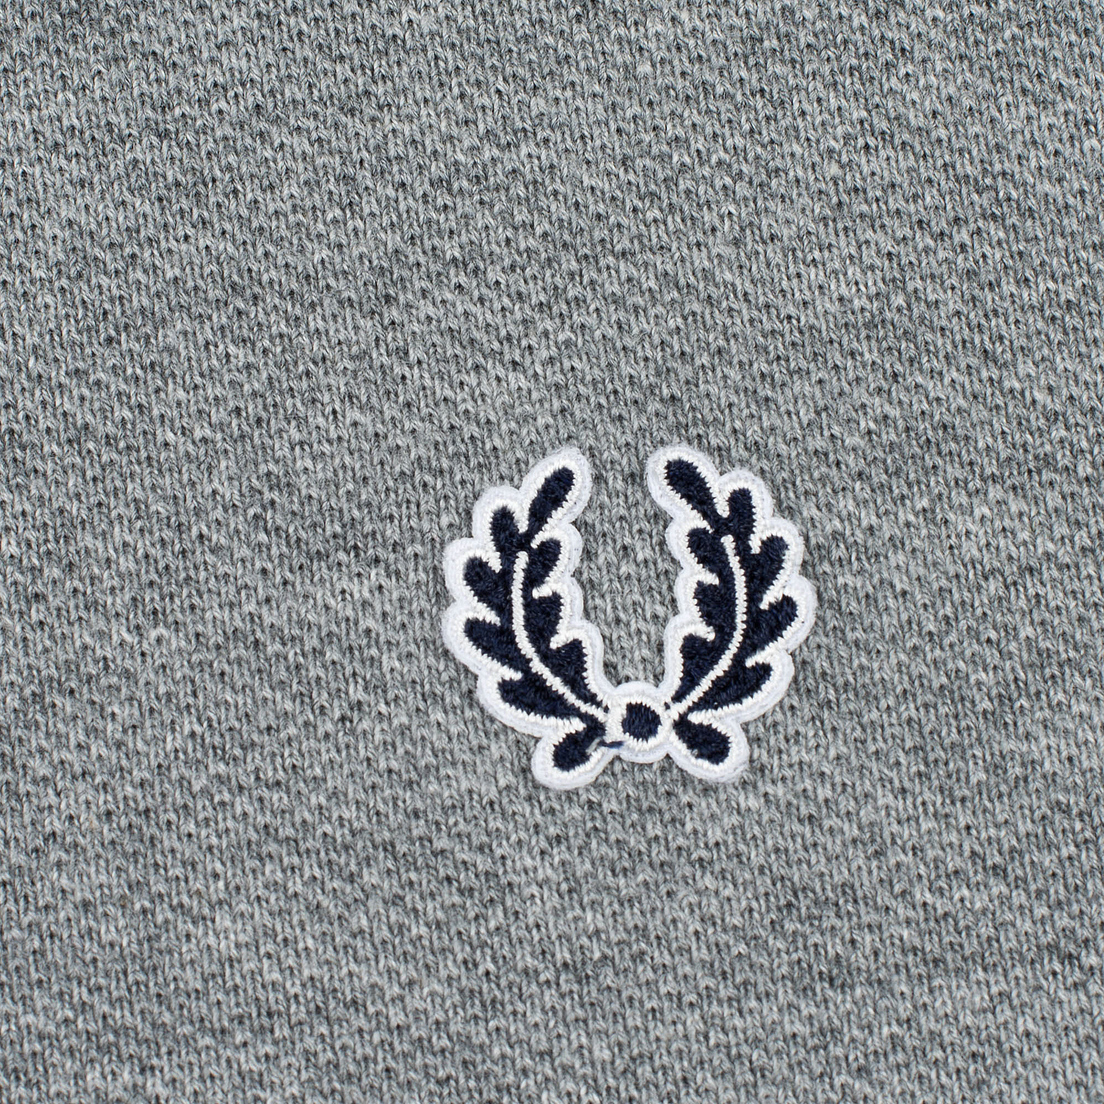 Fred Perry Мужская толстовка Sports Authentic Crew Neck